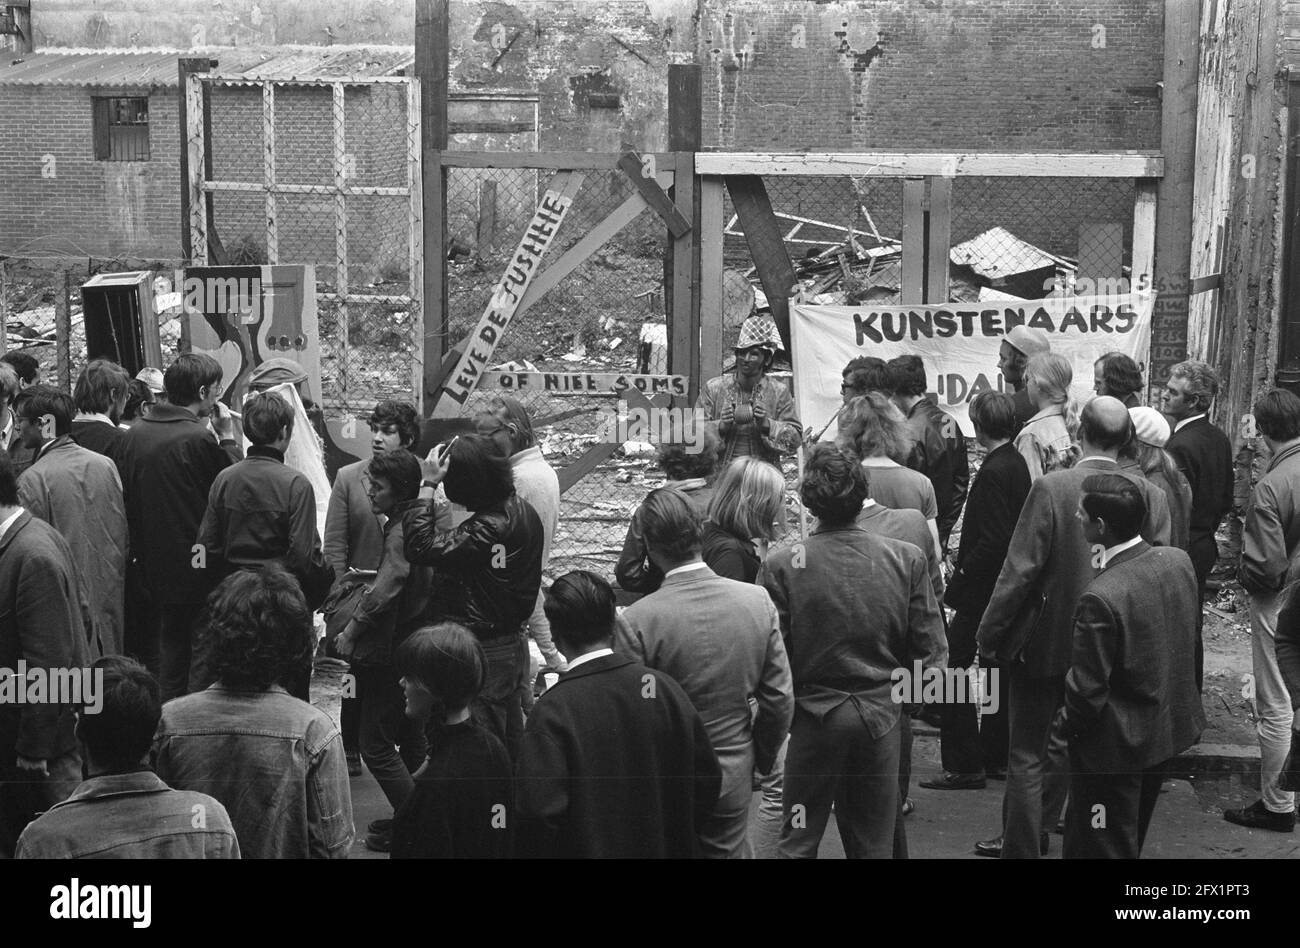 Artists protest against trial Maagdenhuis-occupiers, Amsterdam, at Palace of Justice, June 17, 1969, LAWYERS, signs, occupiers, The Netherlands, 20th century press agency photo, news to remember, documentary, historic photography 1945-1990, visual stories, human history of the Twentieth Century, capturing moments in time Stock Photo